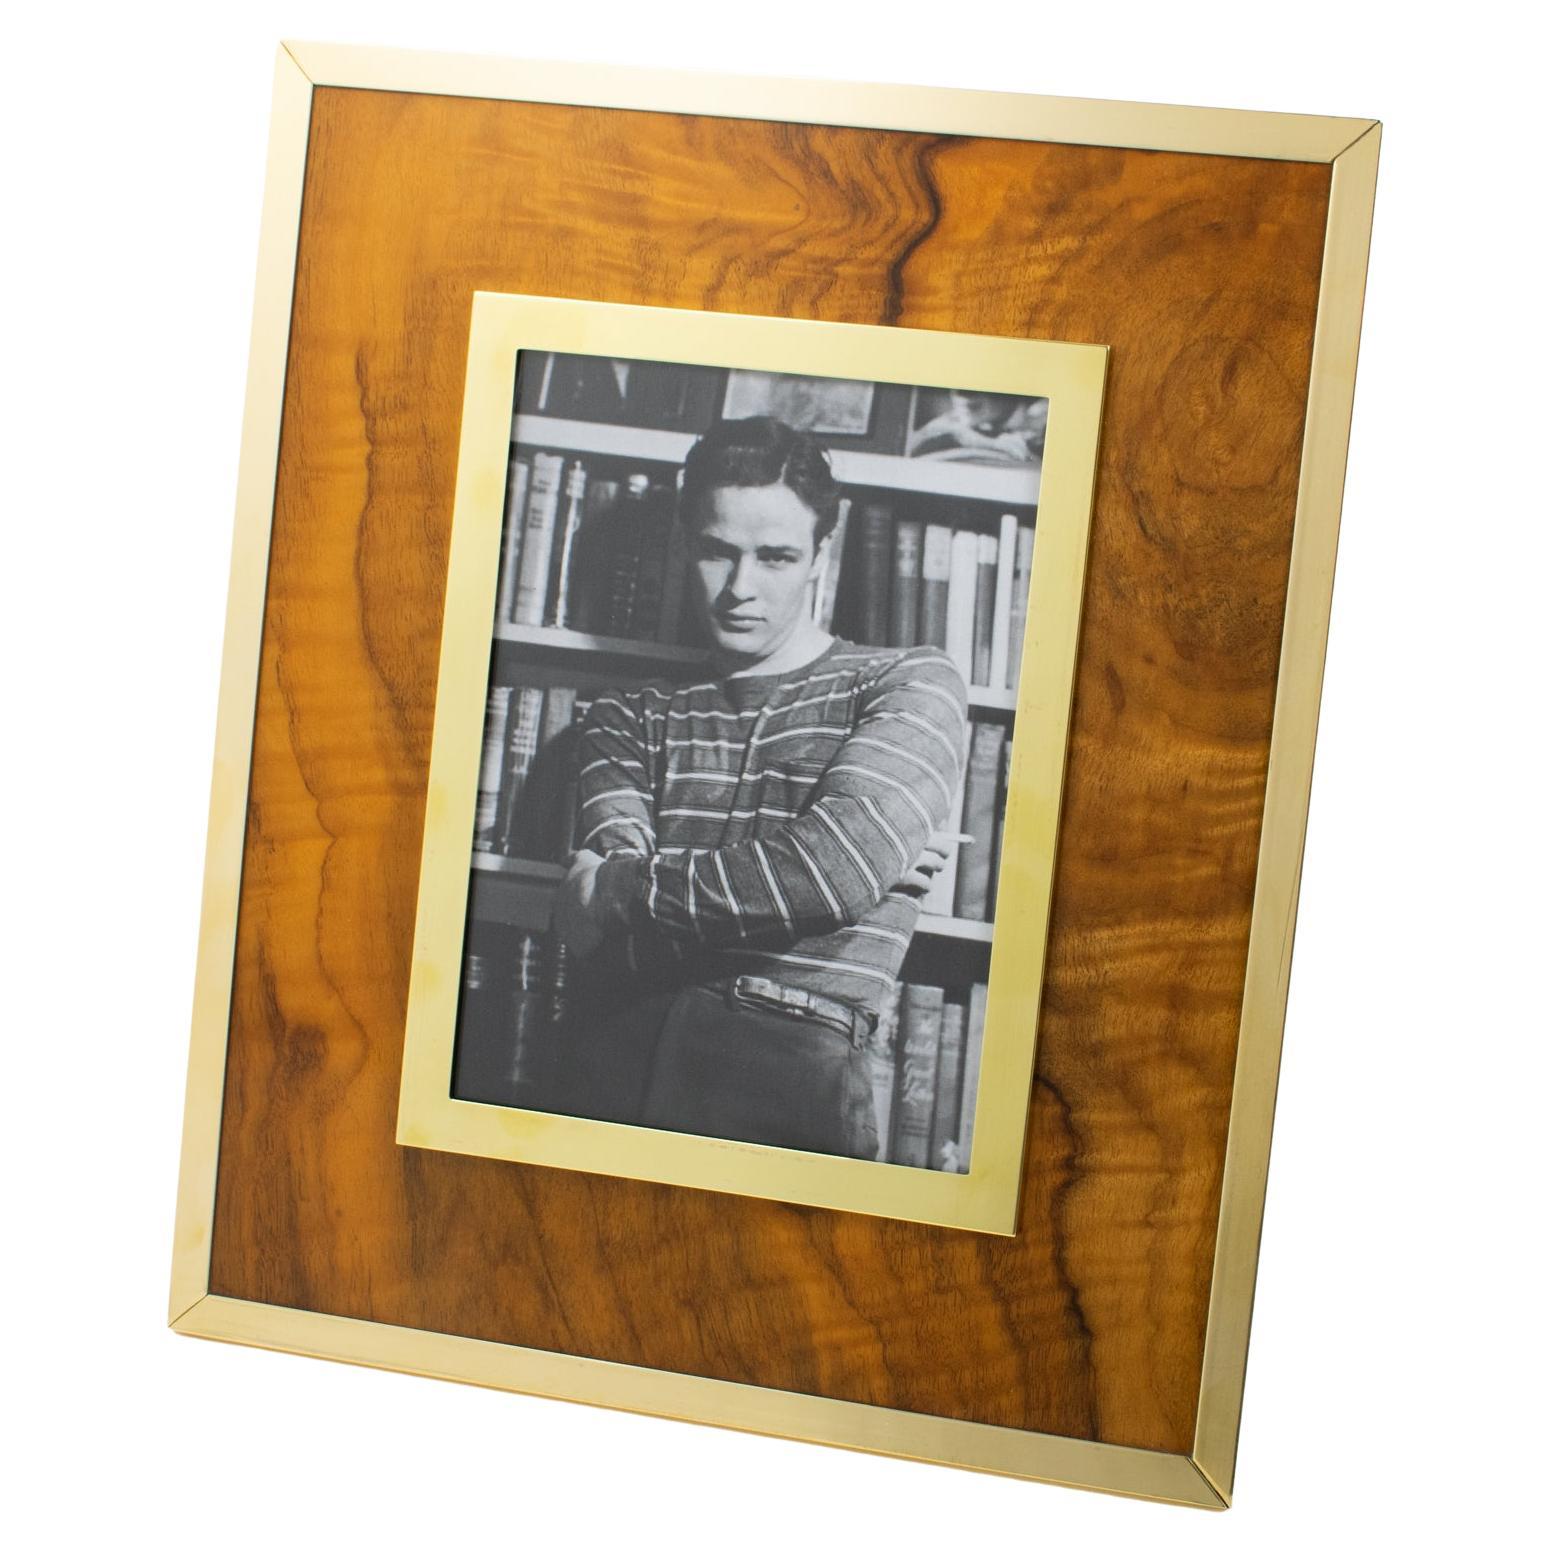 Montagnani Italy Brass and Walnut Wood Picture Frame, 1970s For Sale